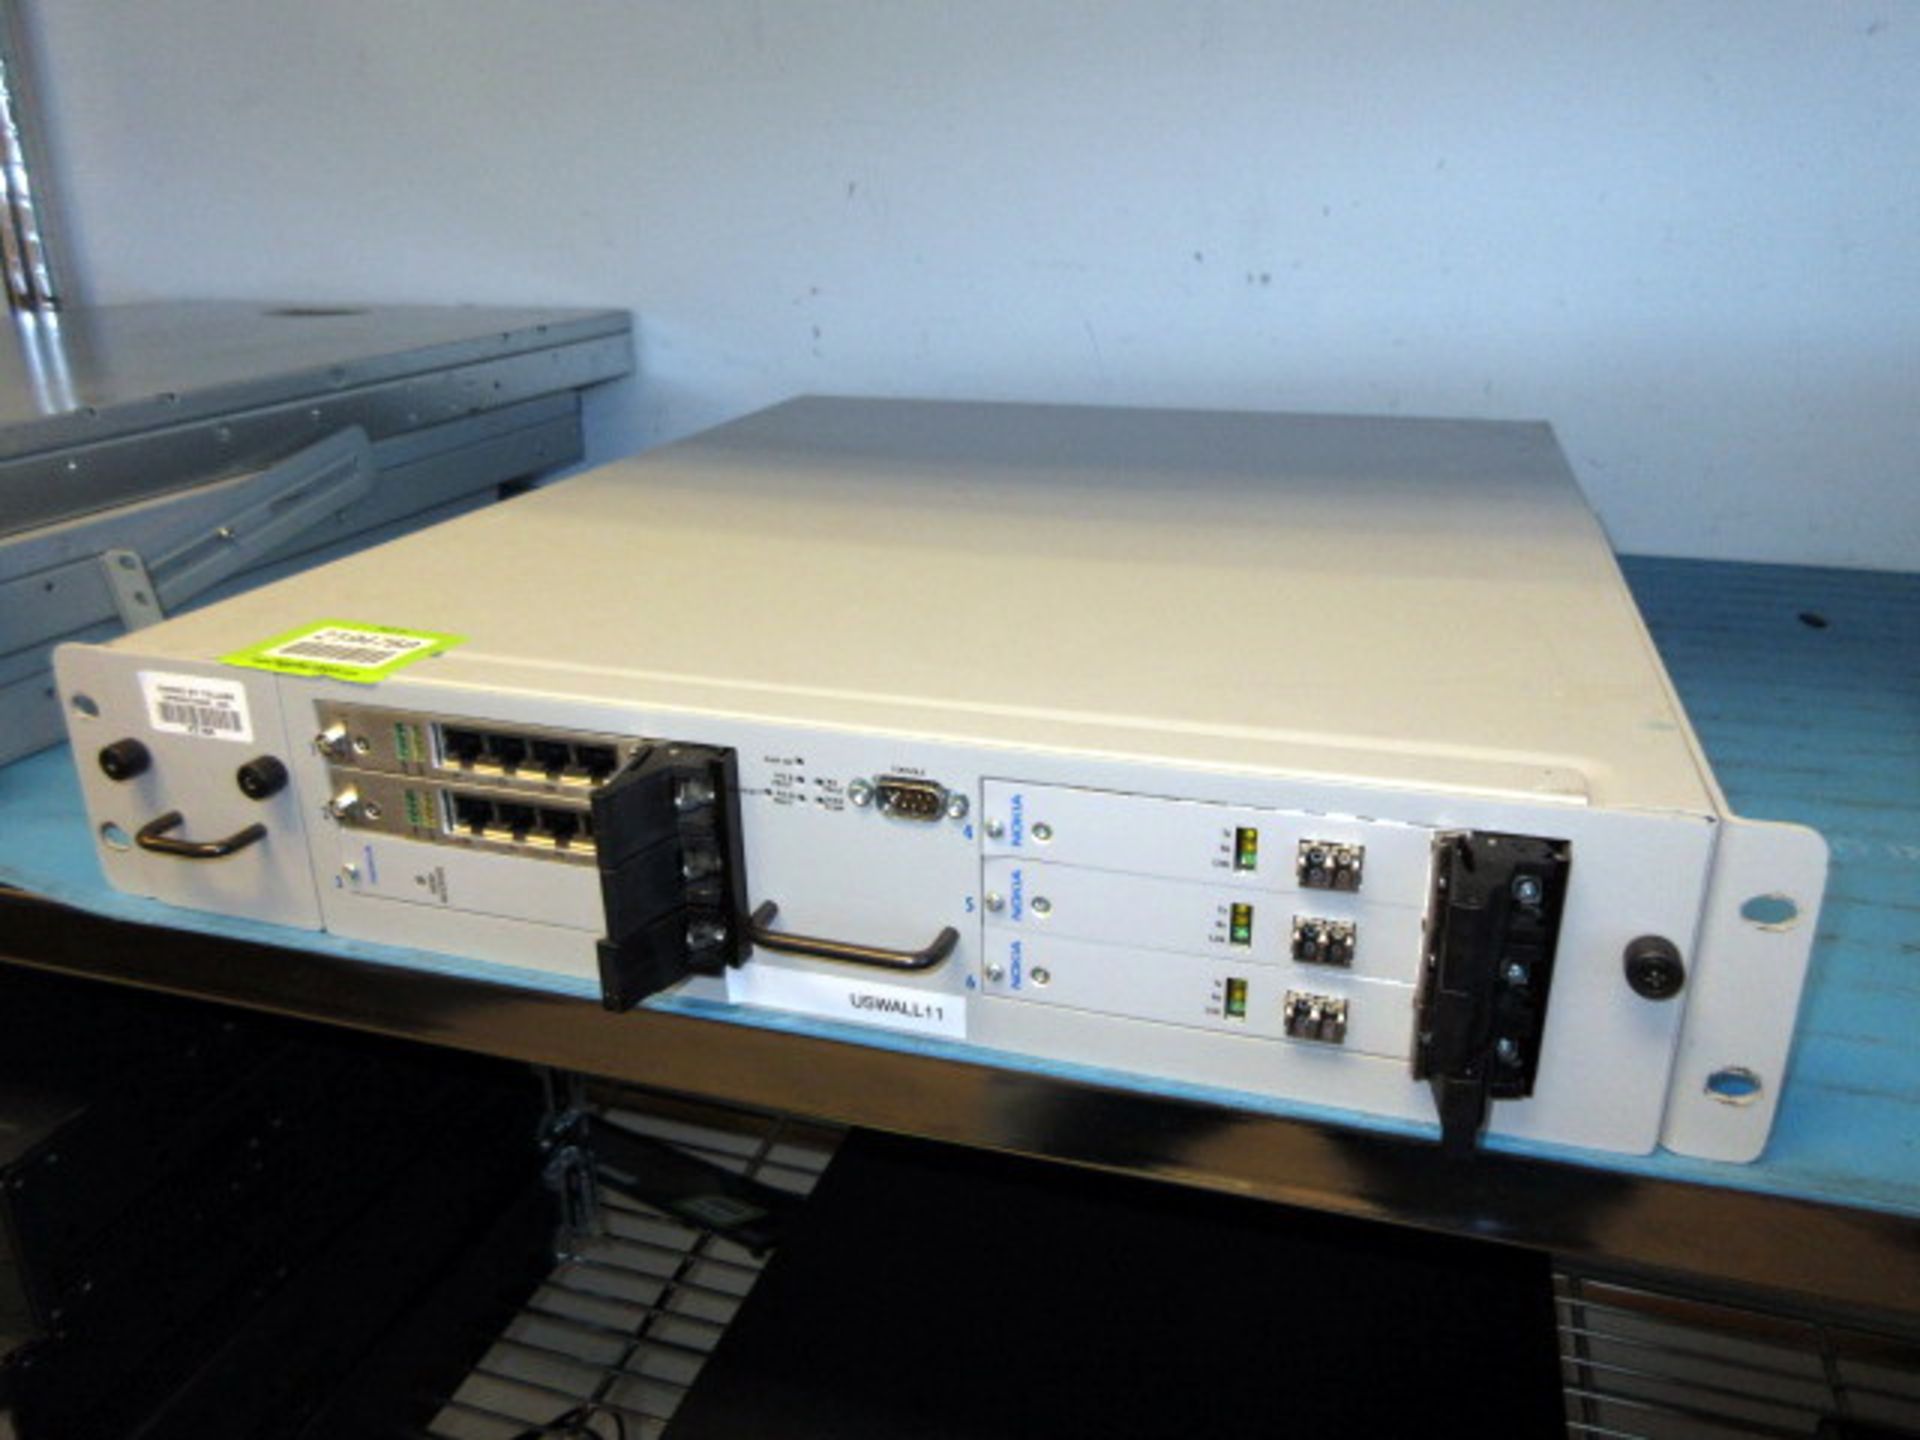 Nokia IP2650 Router/Firewall. Integrated Router/Firewall, 100-240vac, 50/60Hz. SN# 8A002125259. HIT# - Image 3 of 3